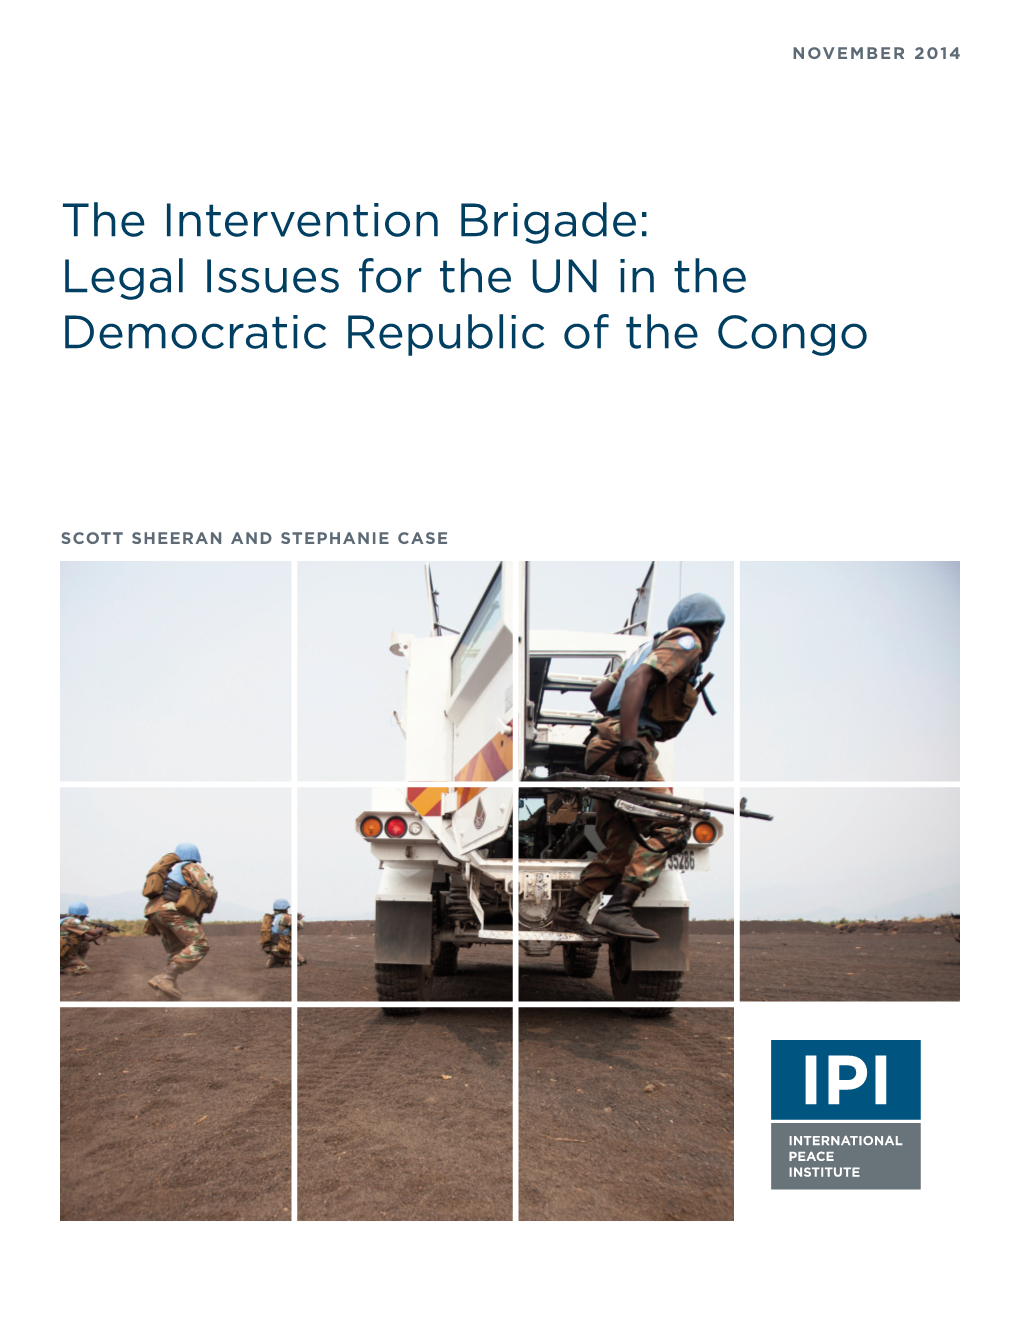 The Intervention Brigade: Legal Issues for the UN in the Democratic Republic of the Congo